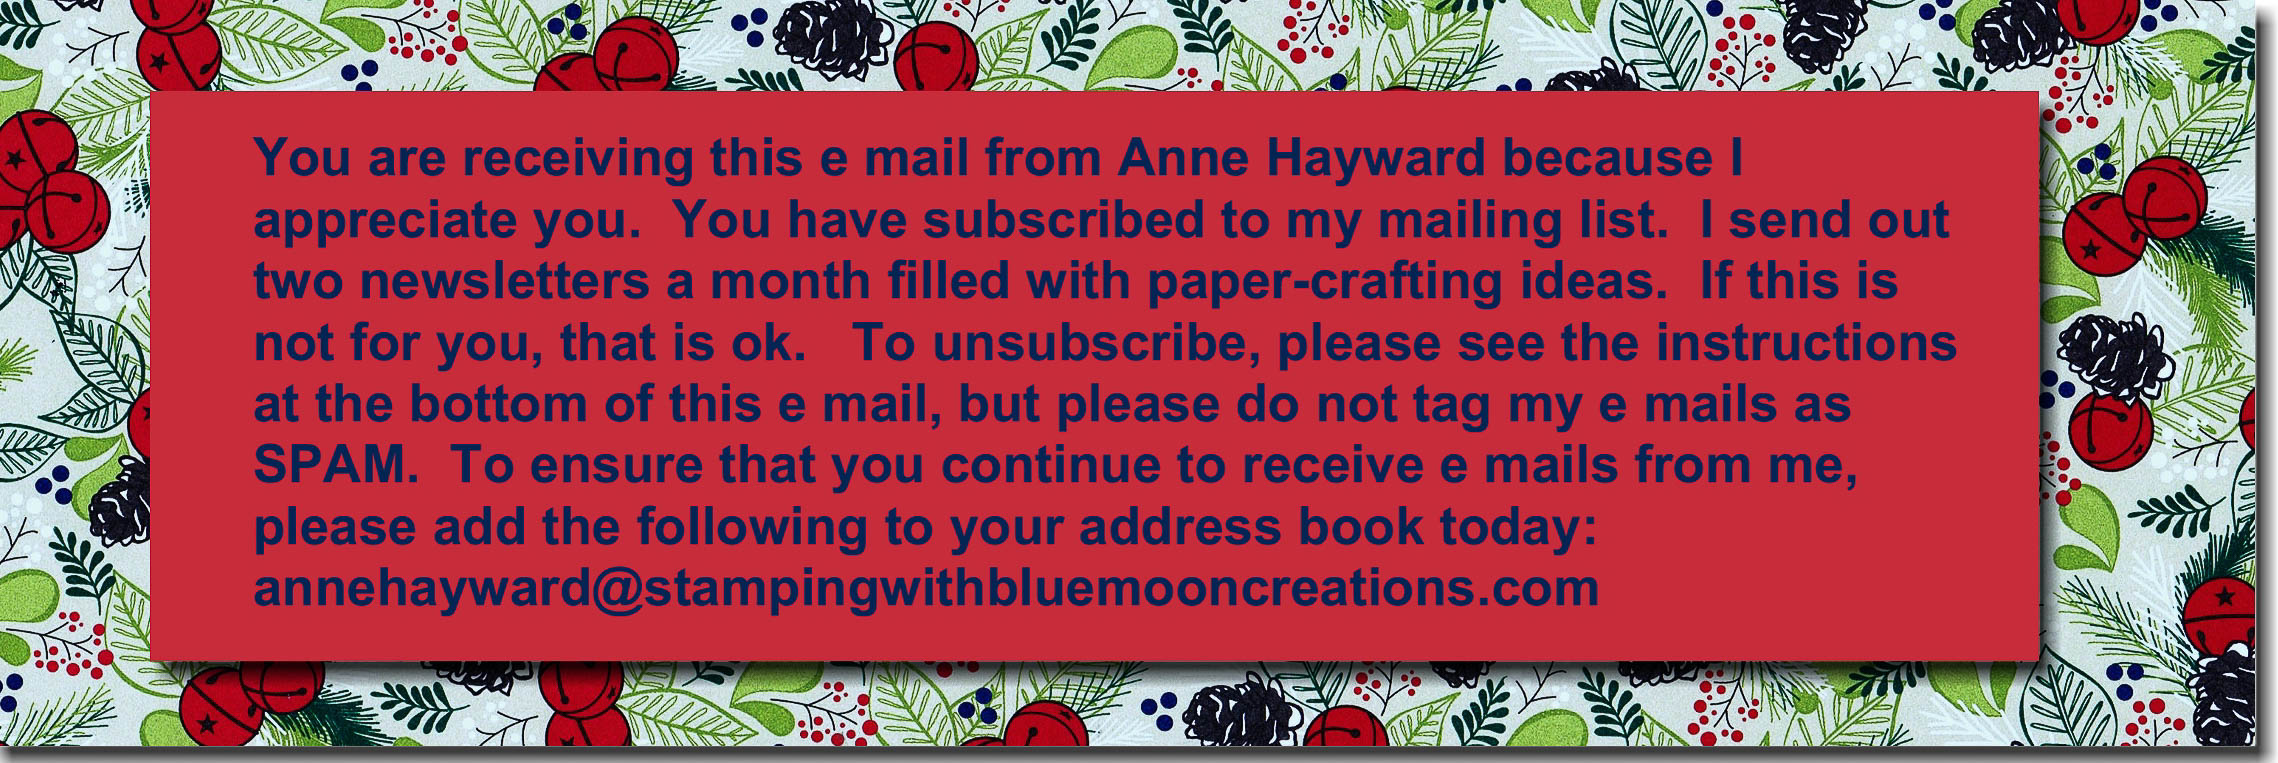 November Stampin' News from Anne Haywawrd